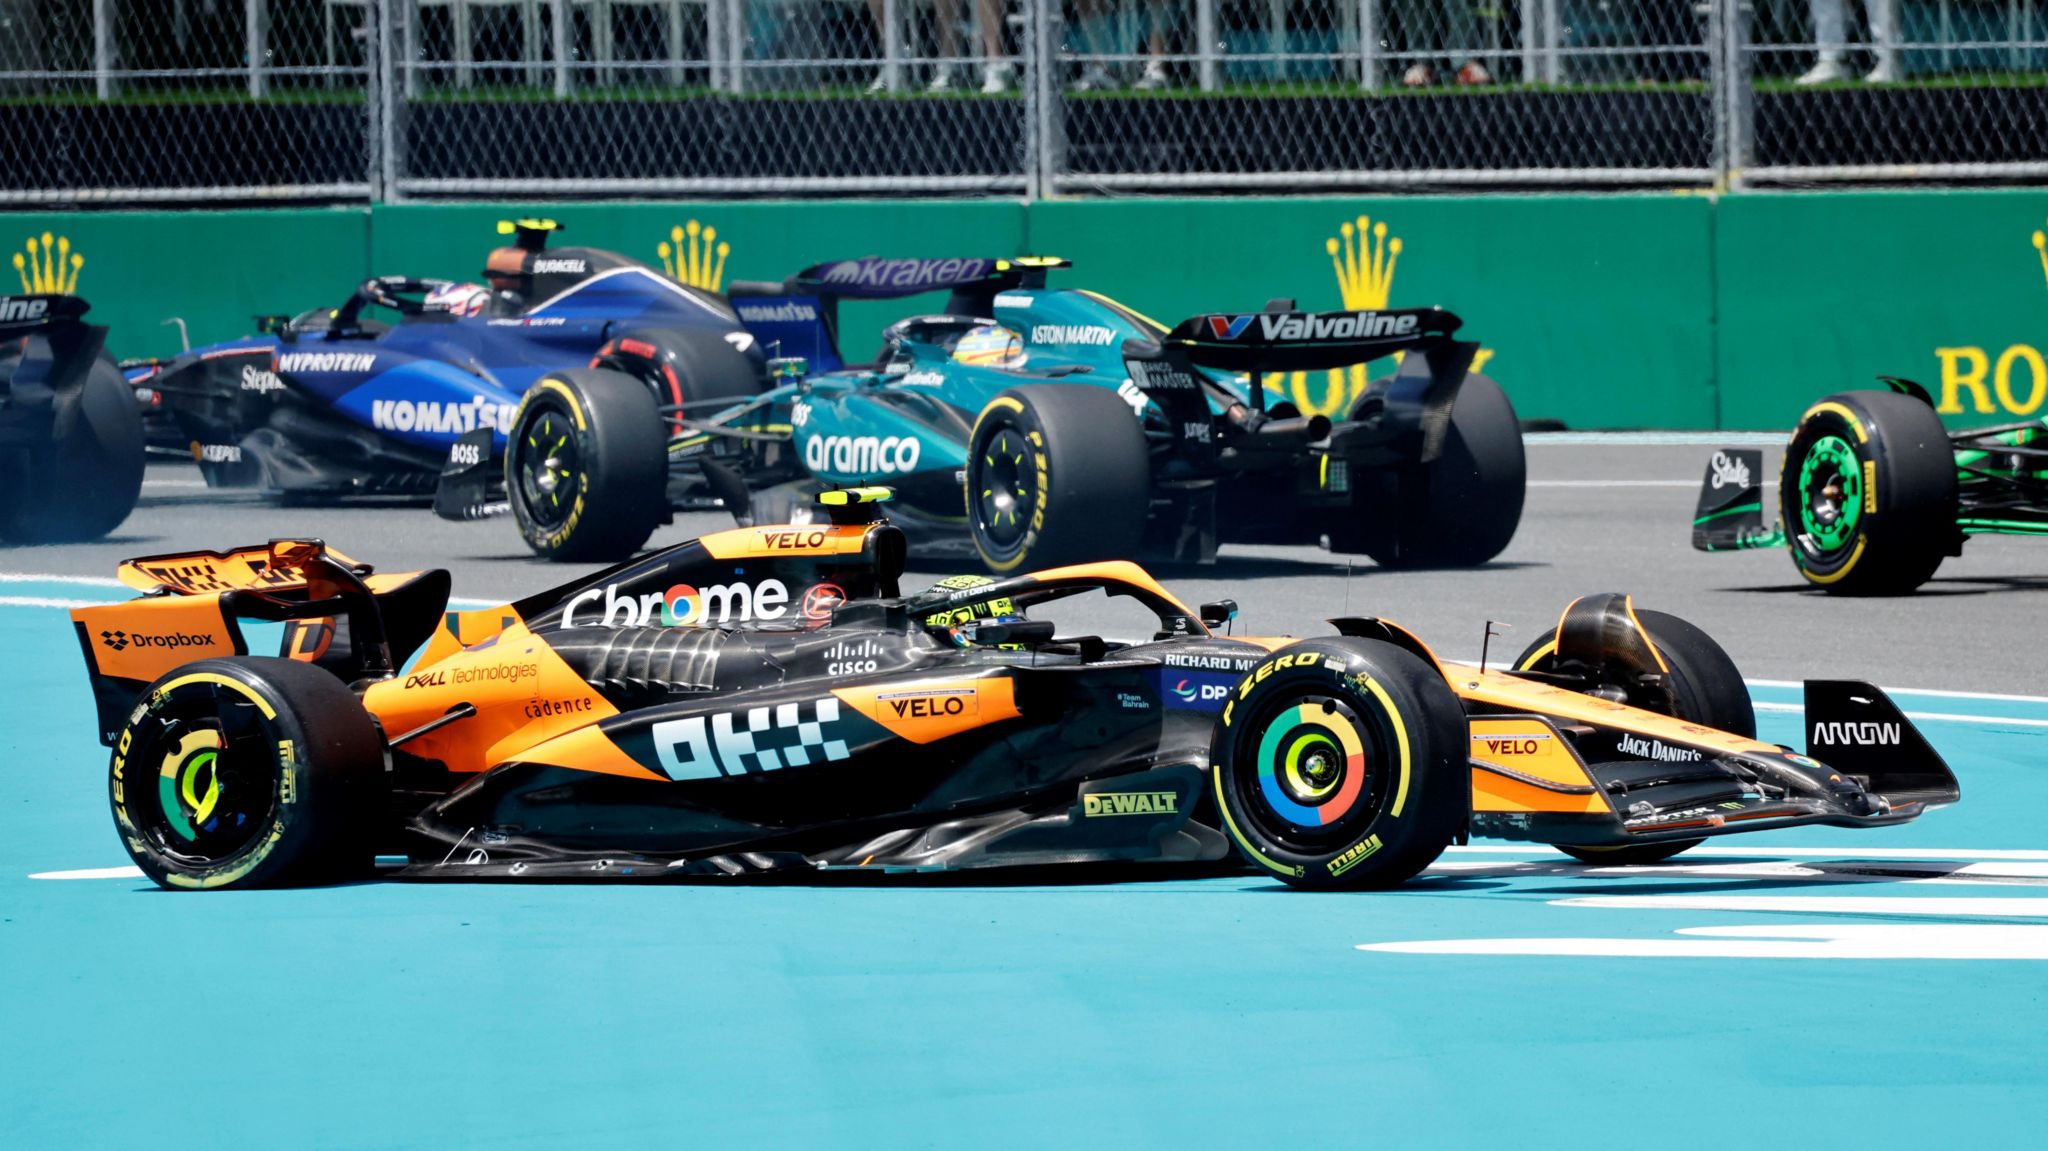 Lando Norris' McLaren spins out at the first corner of the Miami Grand Prix sprint race